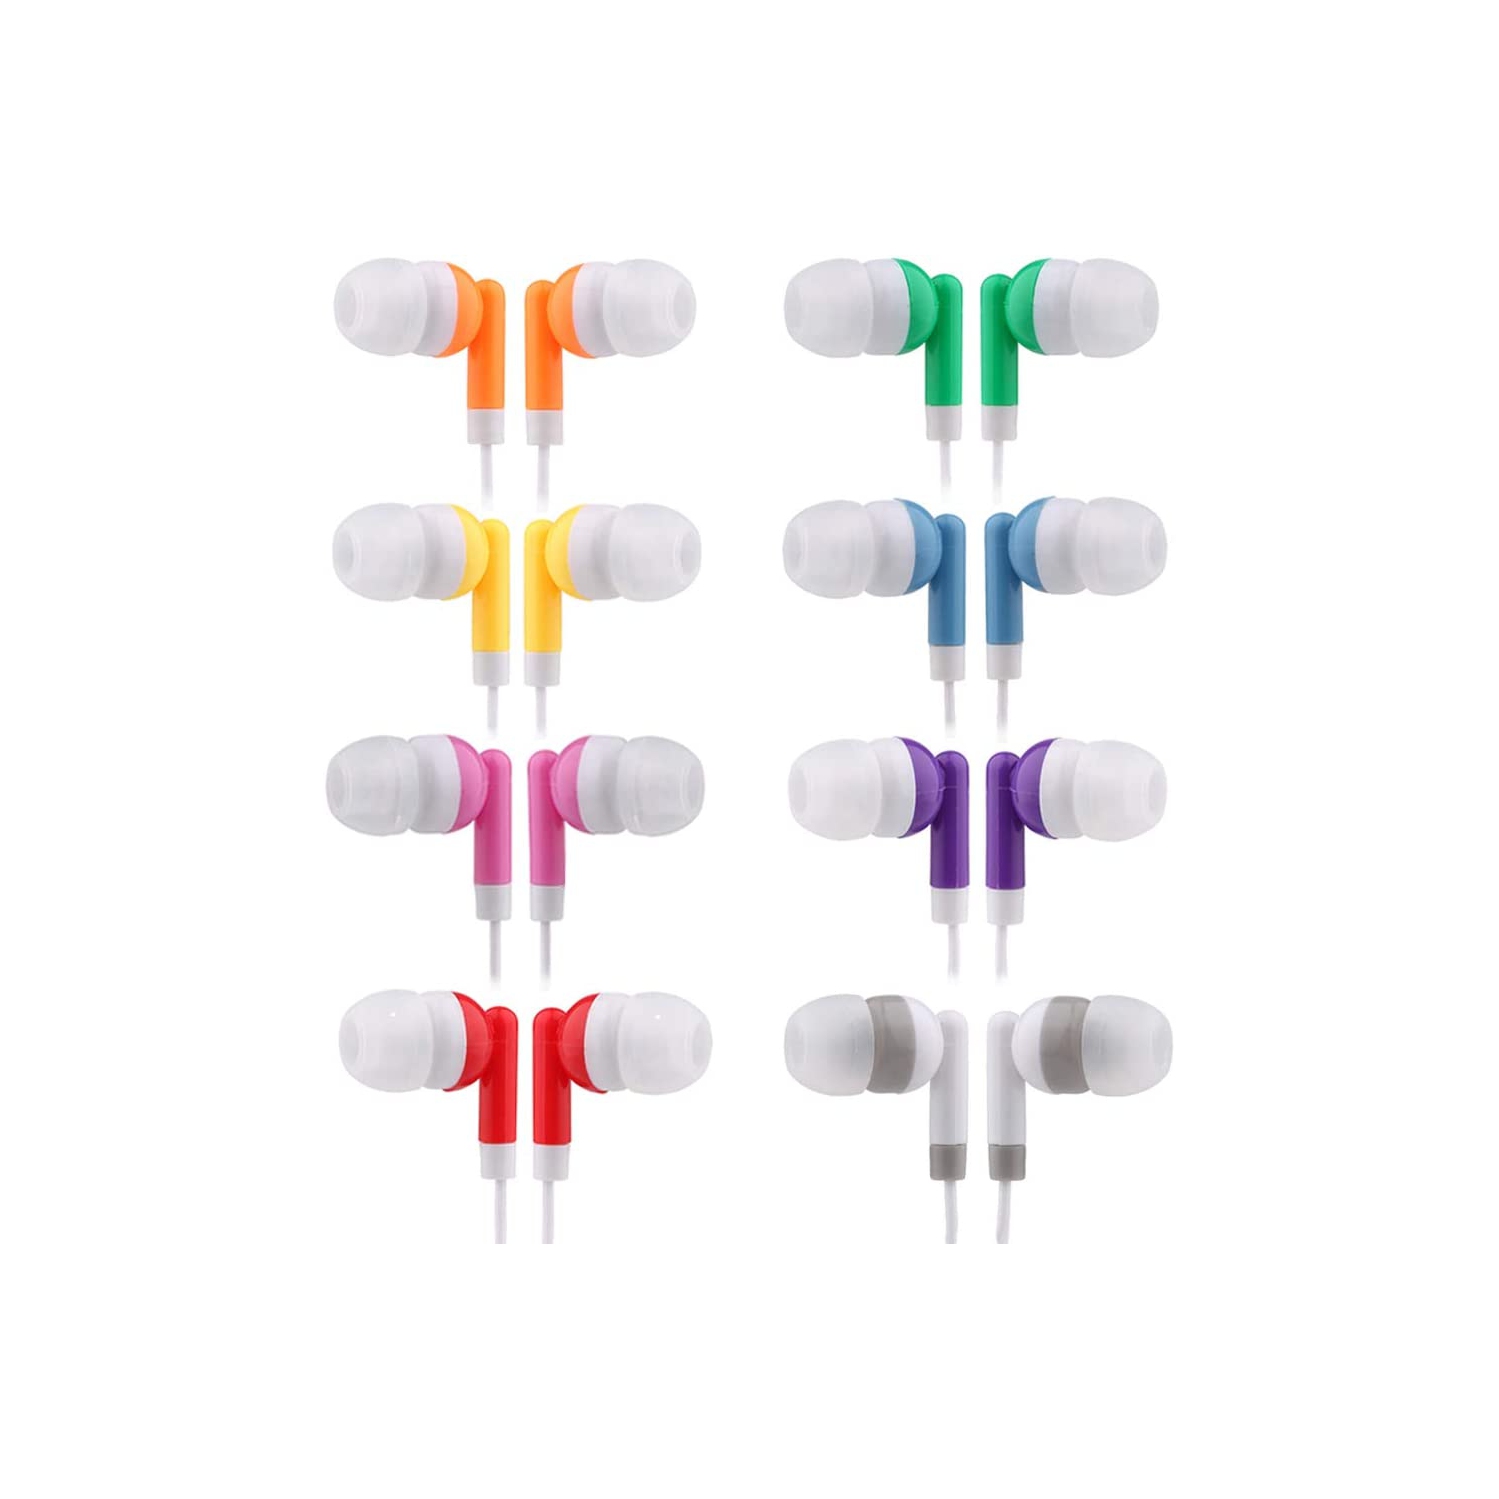 Dolaer Wholesale Kids Bulk Earbuds Headphones 100 Pack Multi Colored Individually Bagged Disposable Earphones Perfect for School Classroom Libraries Students (100Mixed)